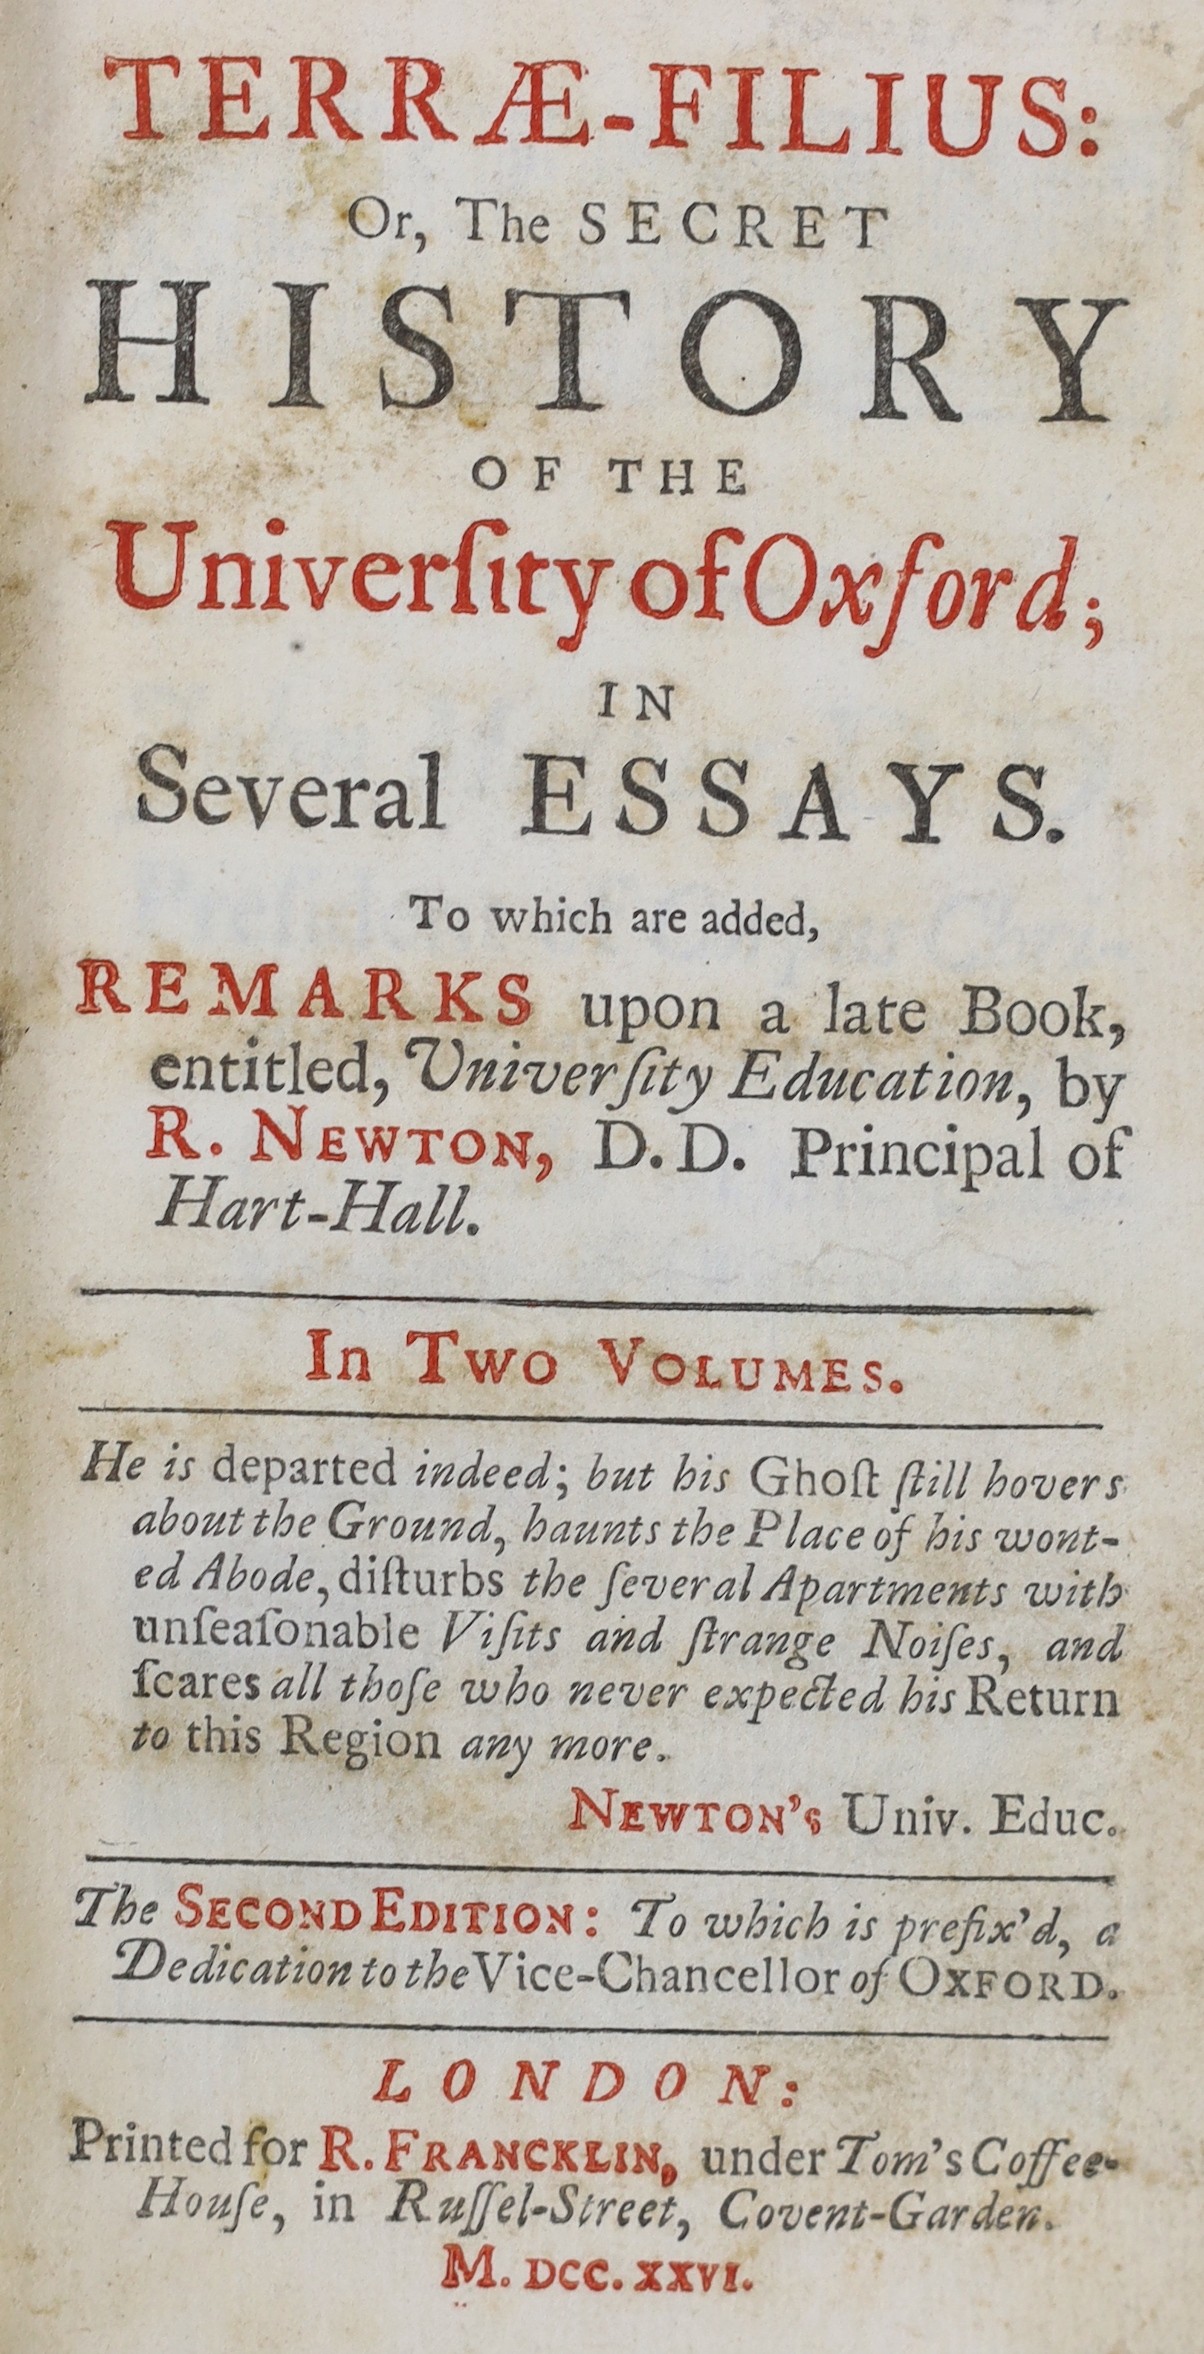 OXON: Pointer, John - Oxoniensis Academia: or, the Antiquities and Curiosities of the University of Oxford... rebound 20th cent. cloth, sm. 8vo. 1749; Terrae Filius: or, the Secret History of the University of Oxford; in